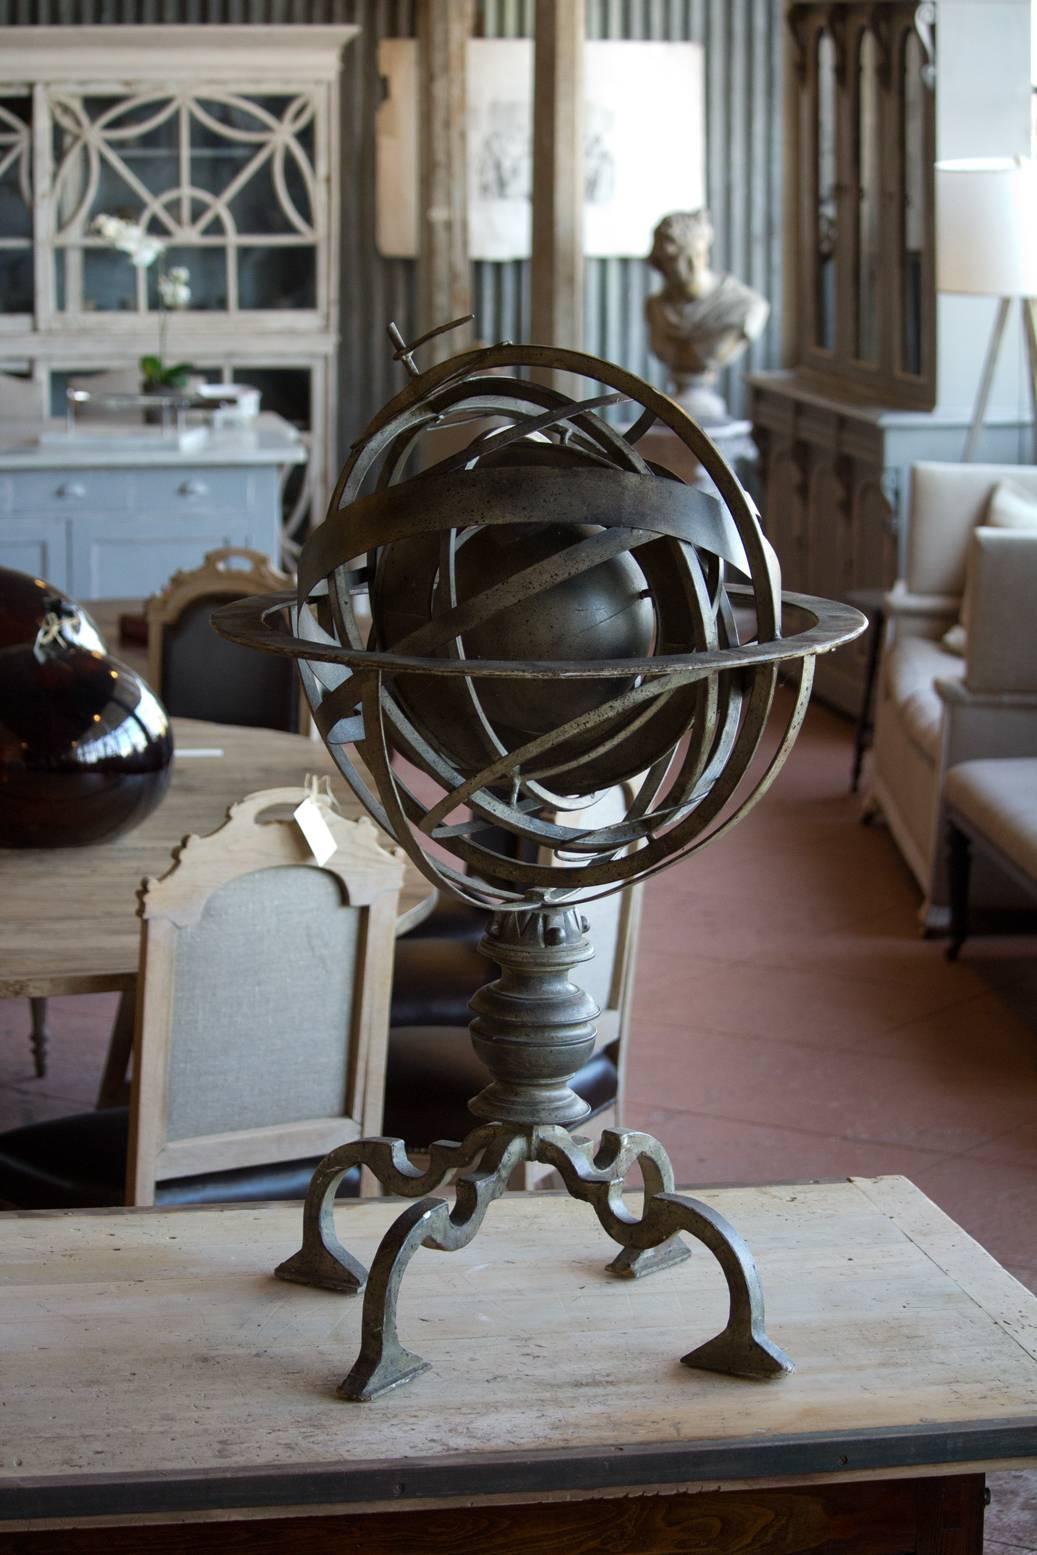 A English vintage brass spherical armillary astrolabe globe. They were designed over 2000 years ago to solve astronomical problems, specifically to tell time.